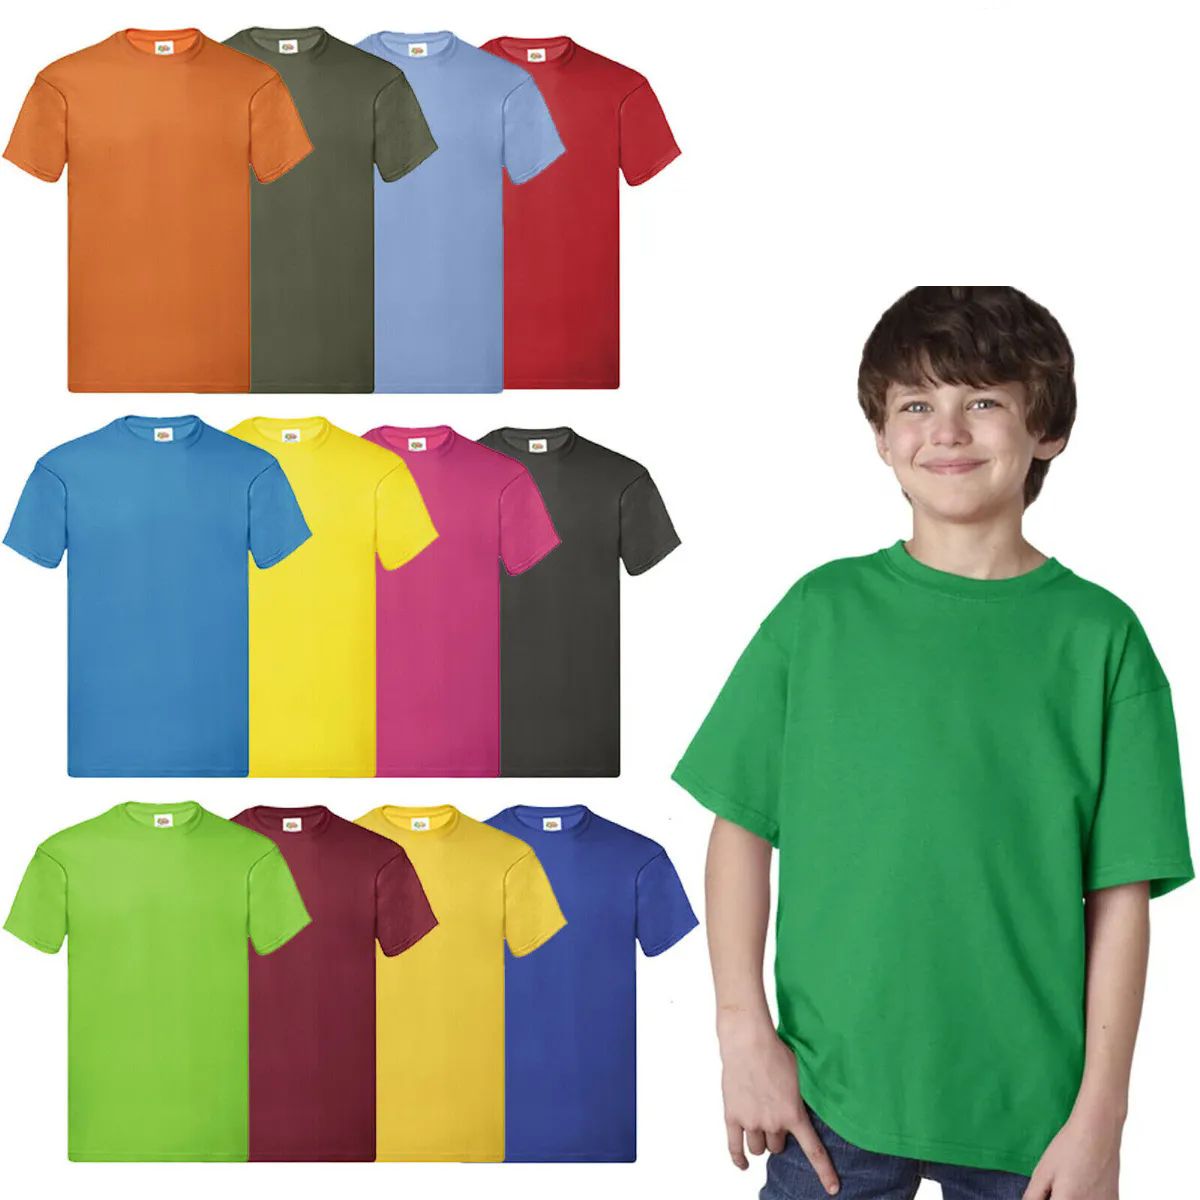 360 Pieces of Billion Hats Kids Youth Cotton Assorted Colors T Shirts Size S